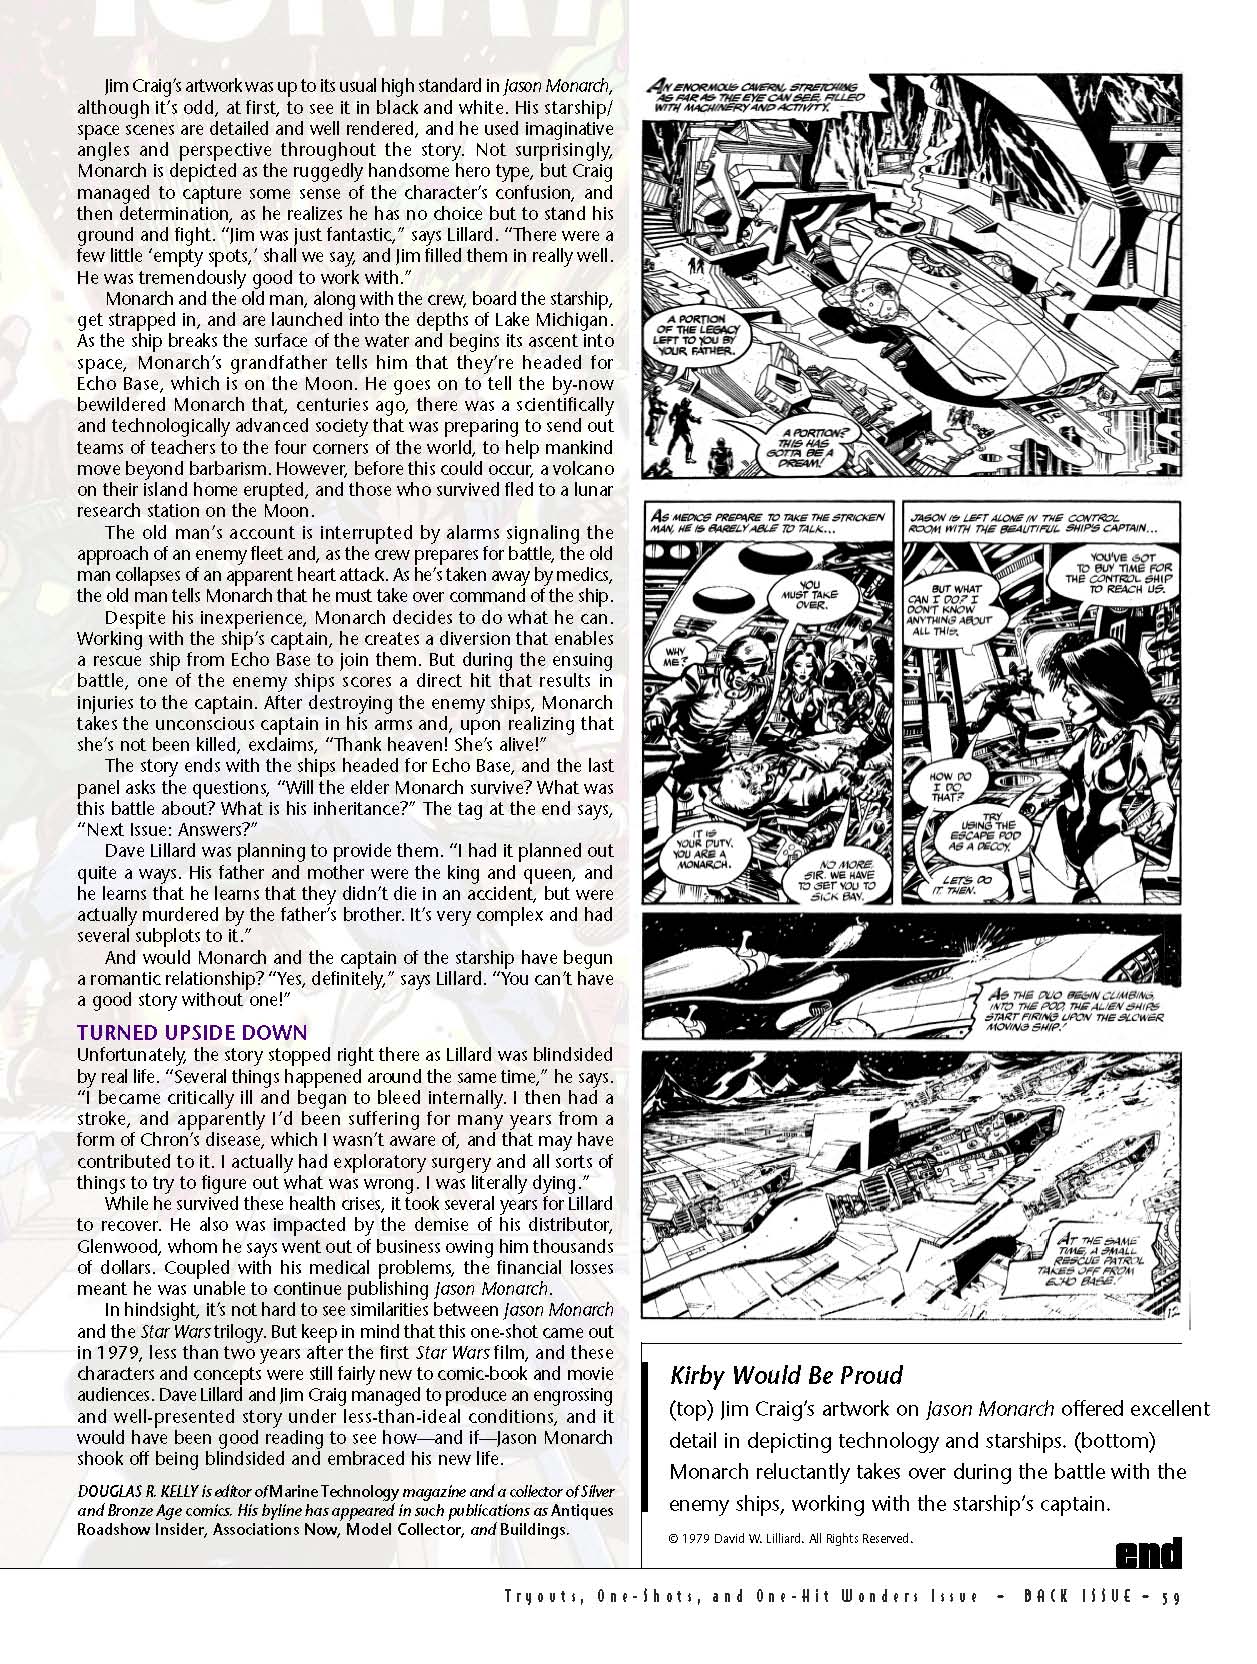 Read online Back Issue comic -  Issue #71 - 61